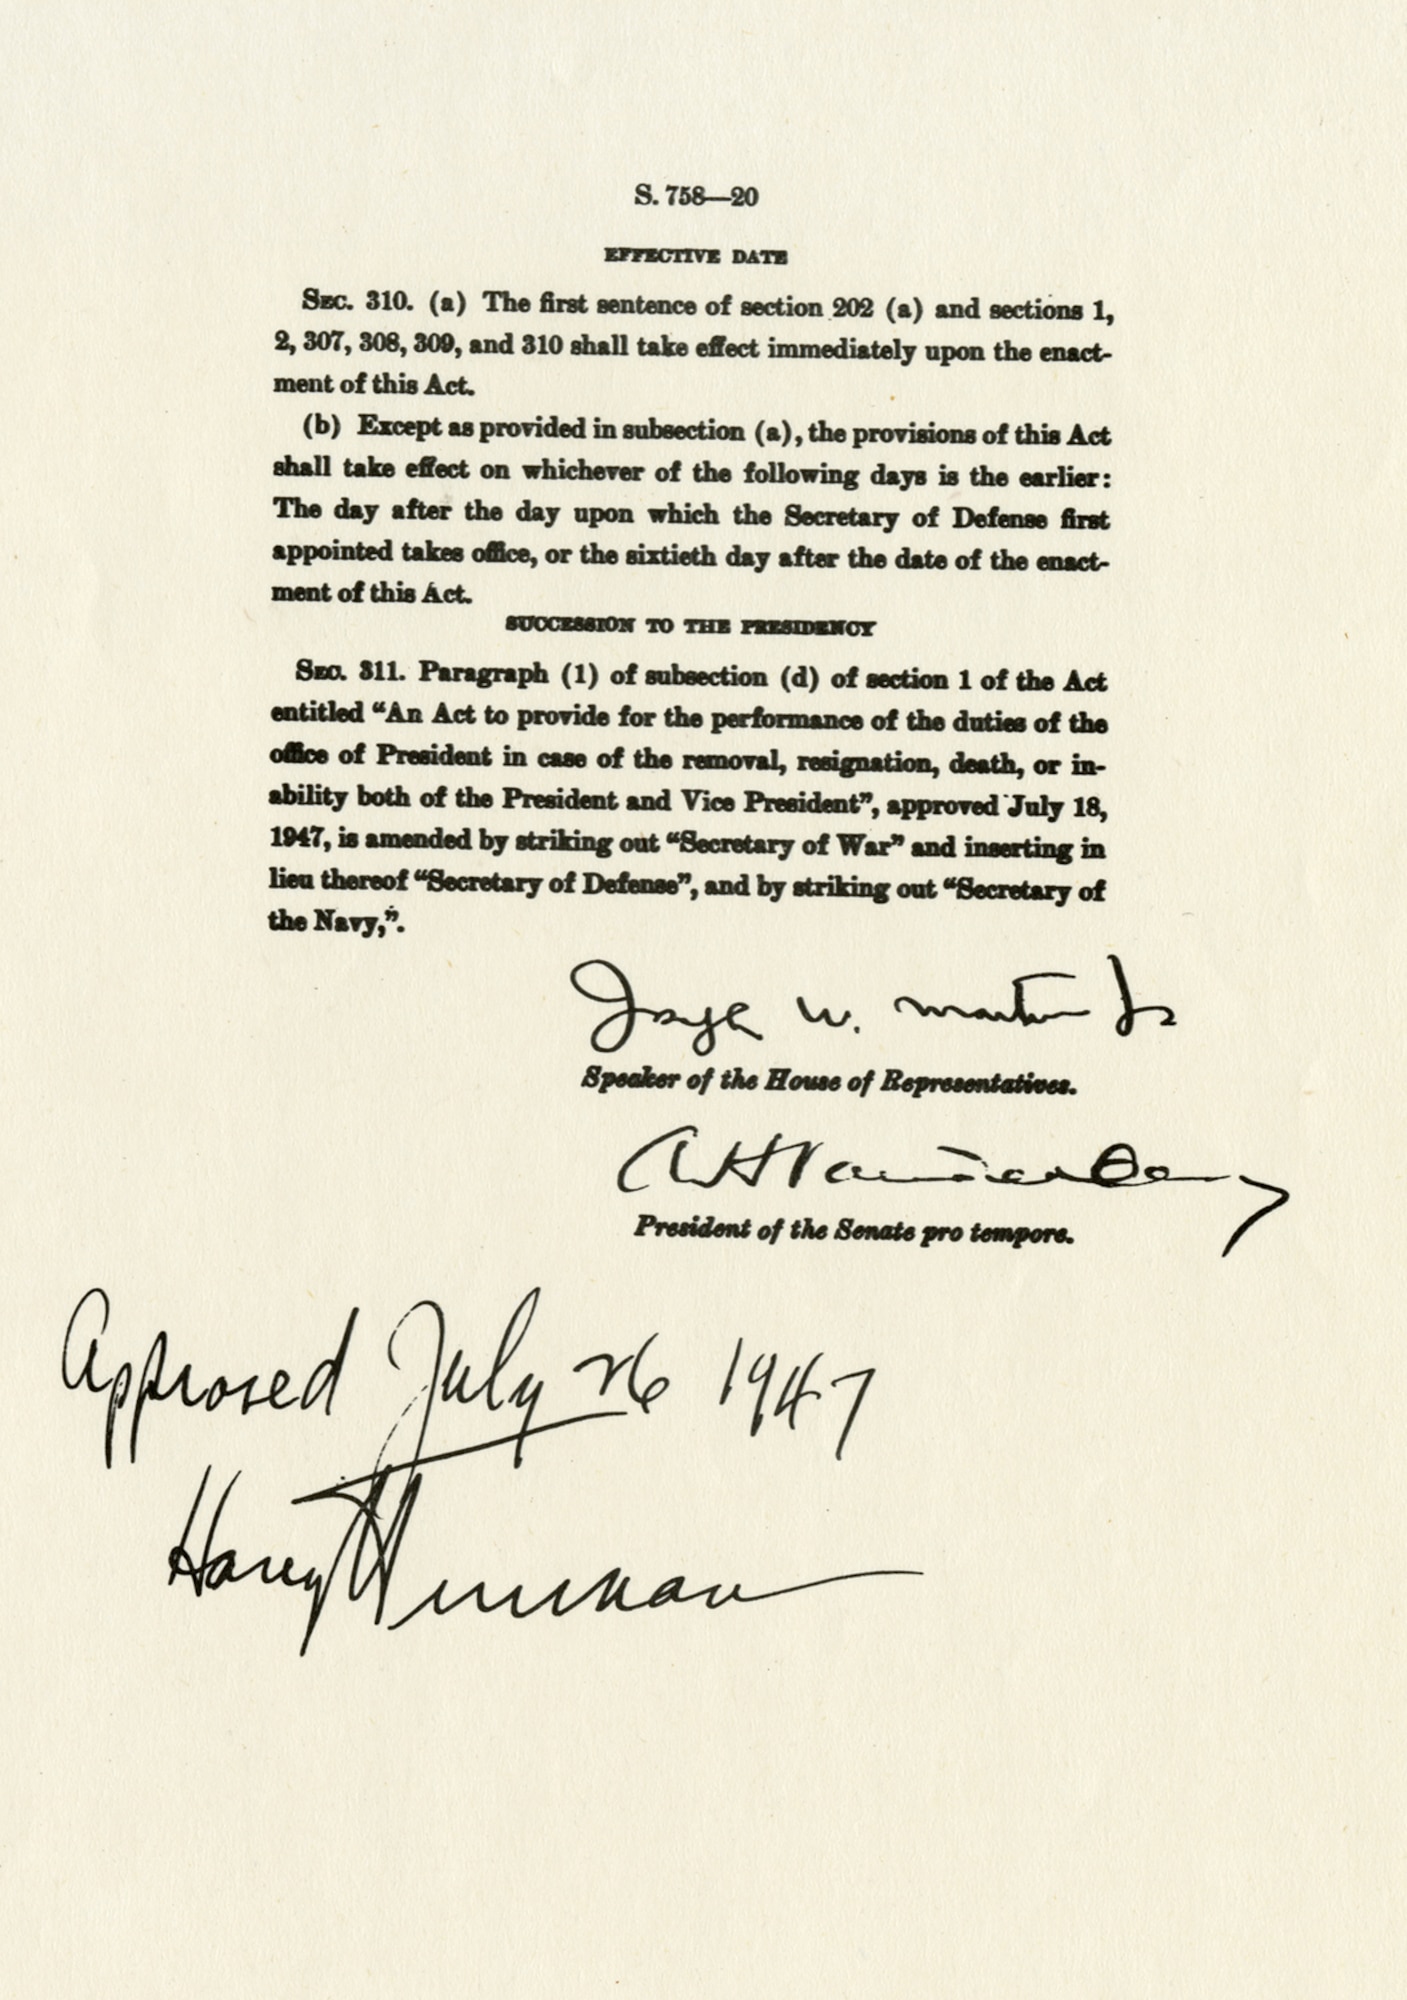 Copy (enlarged) of the National Security Act of 1947, which was signed by President Truman and established the United States Air Force. (U.S. Air Force photo)